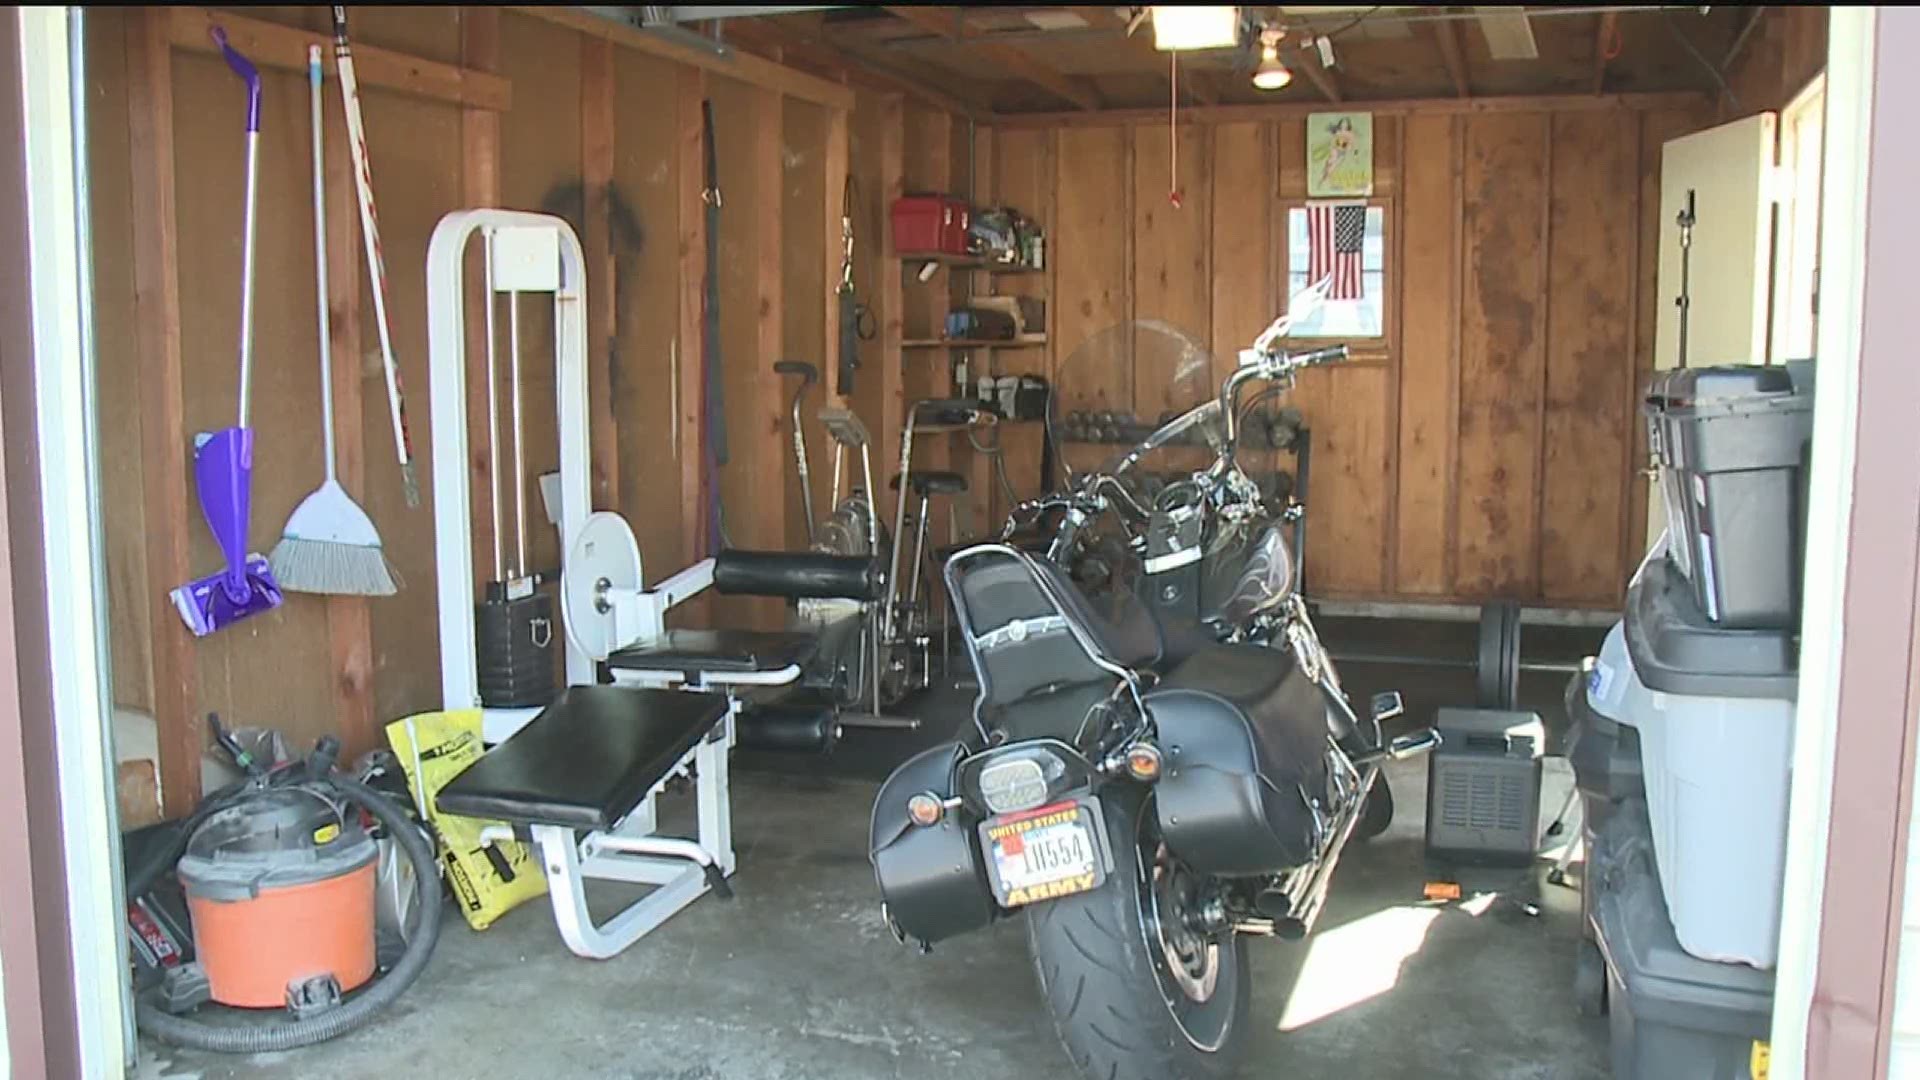 With gyms closed, gym fanatics are trying to find their own equipment to use at home.